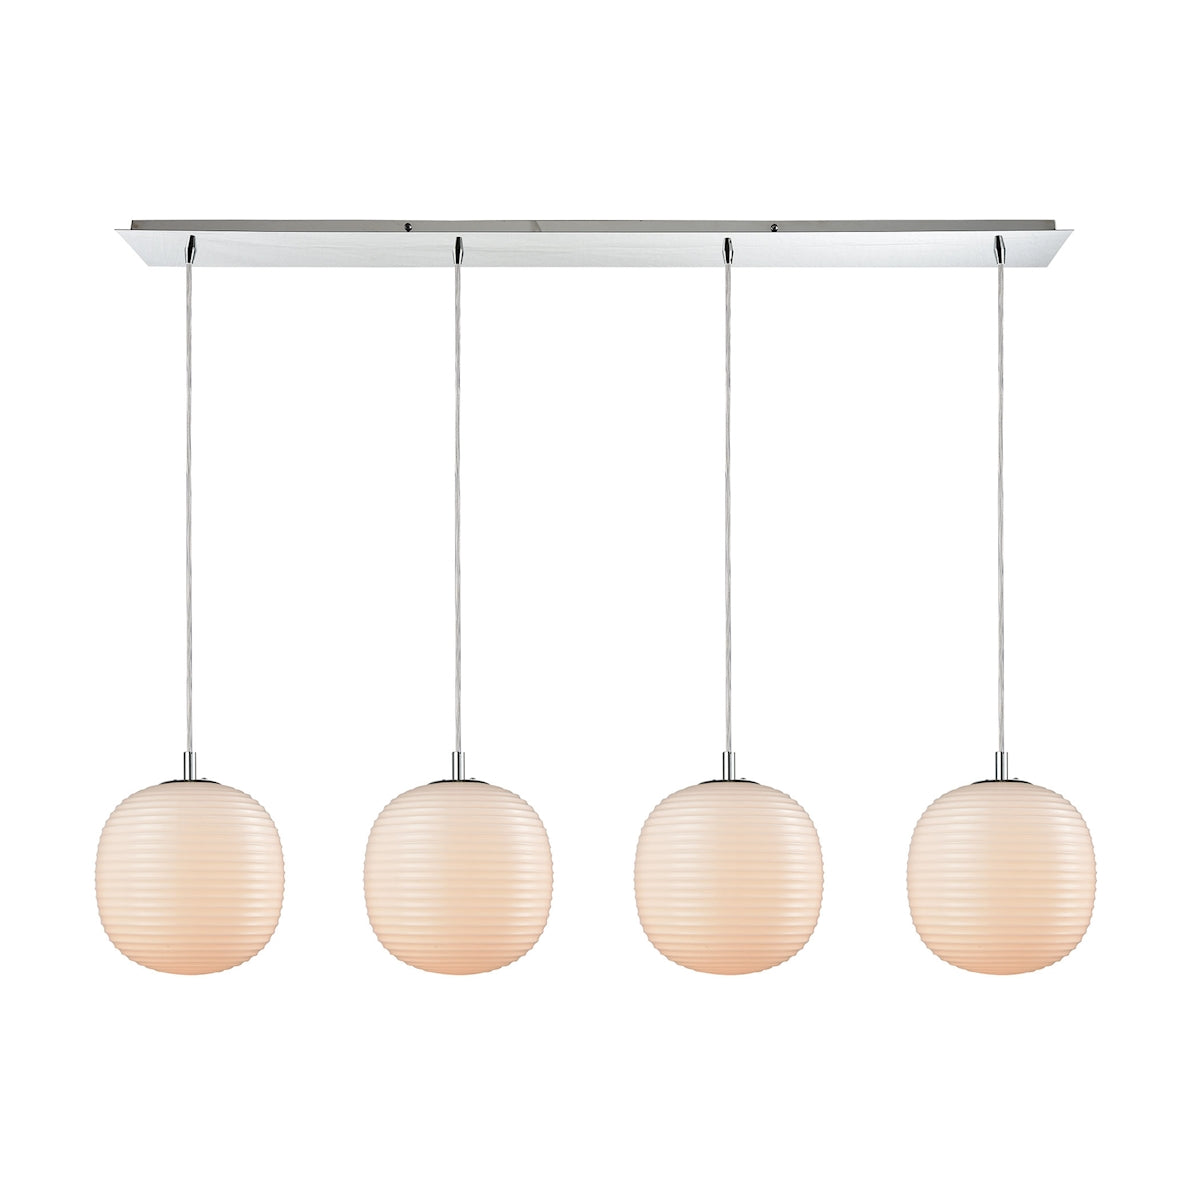 ELK Lighting 56560/4LP Beehive 4-Light Linear Pendant Fixture in Polished Chrome with Opal White Beehive Glass